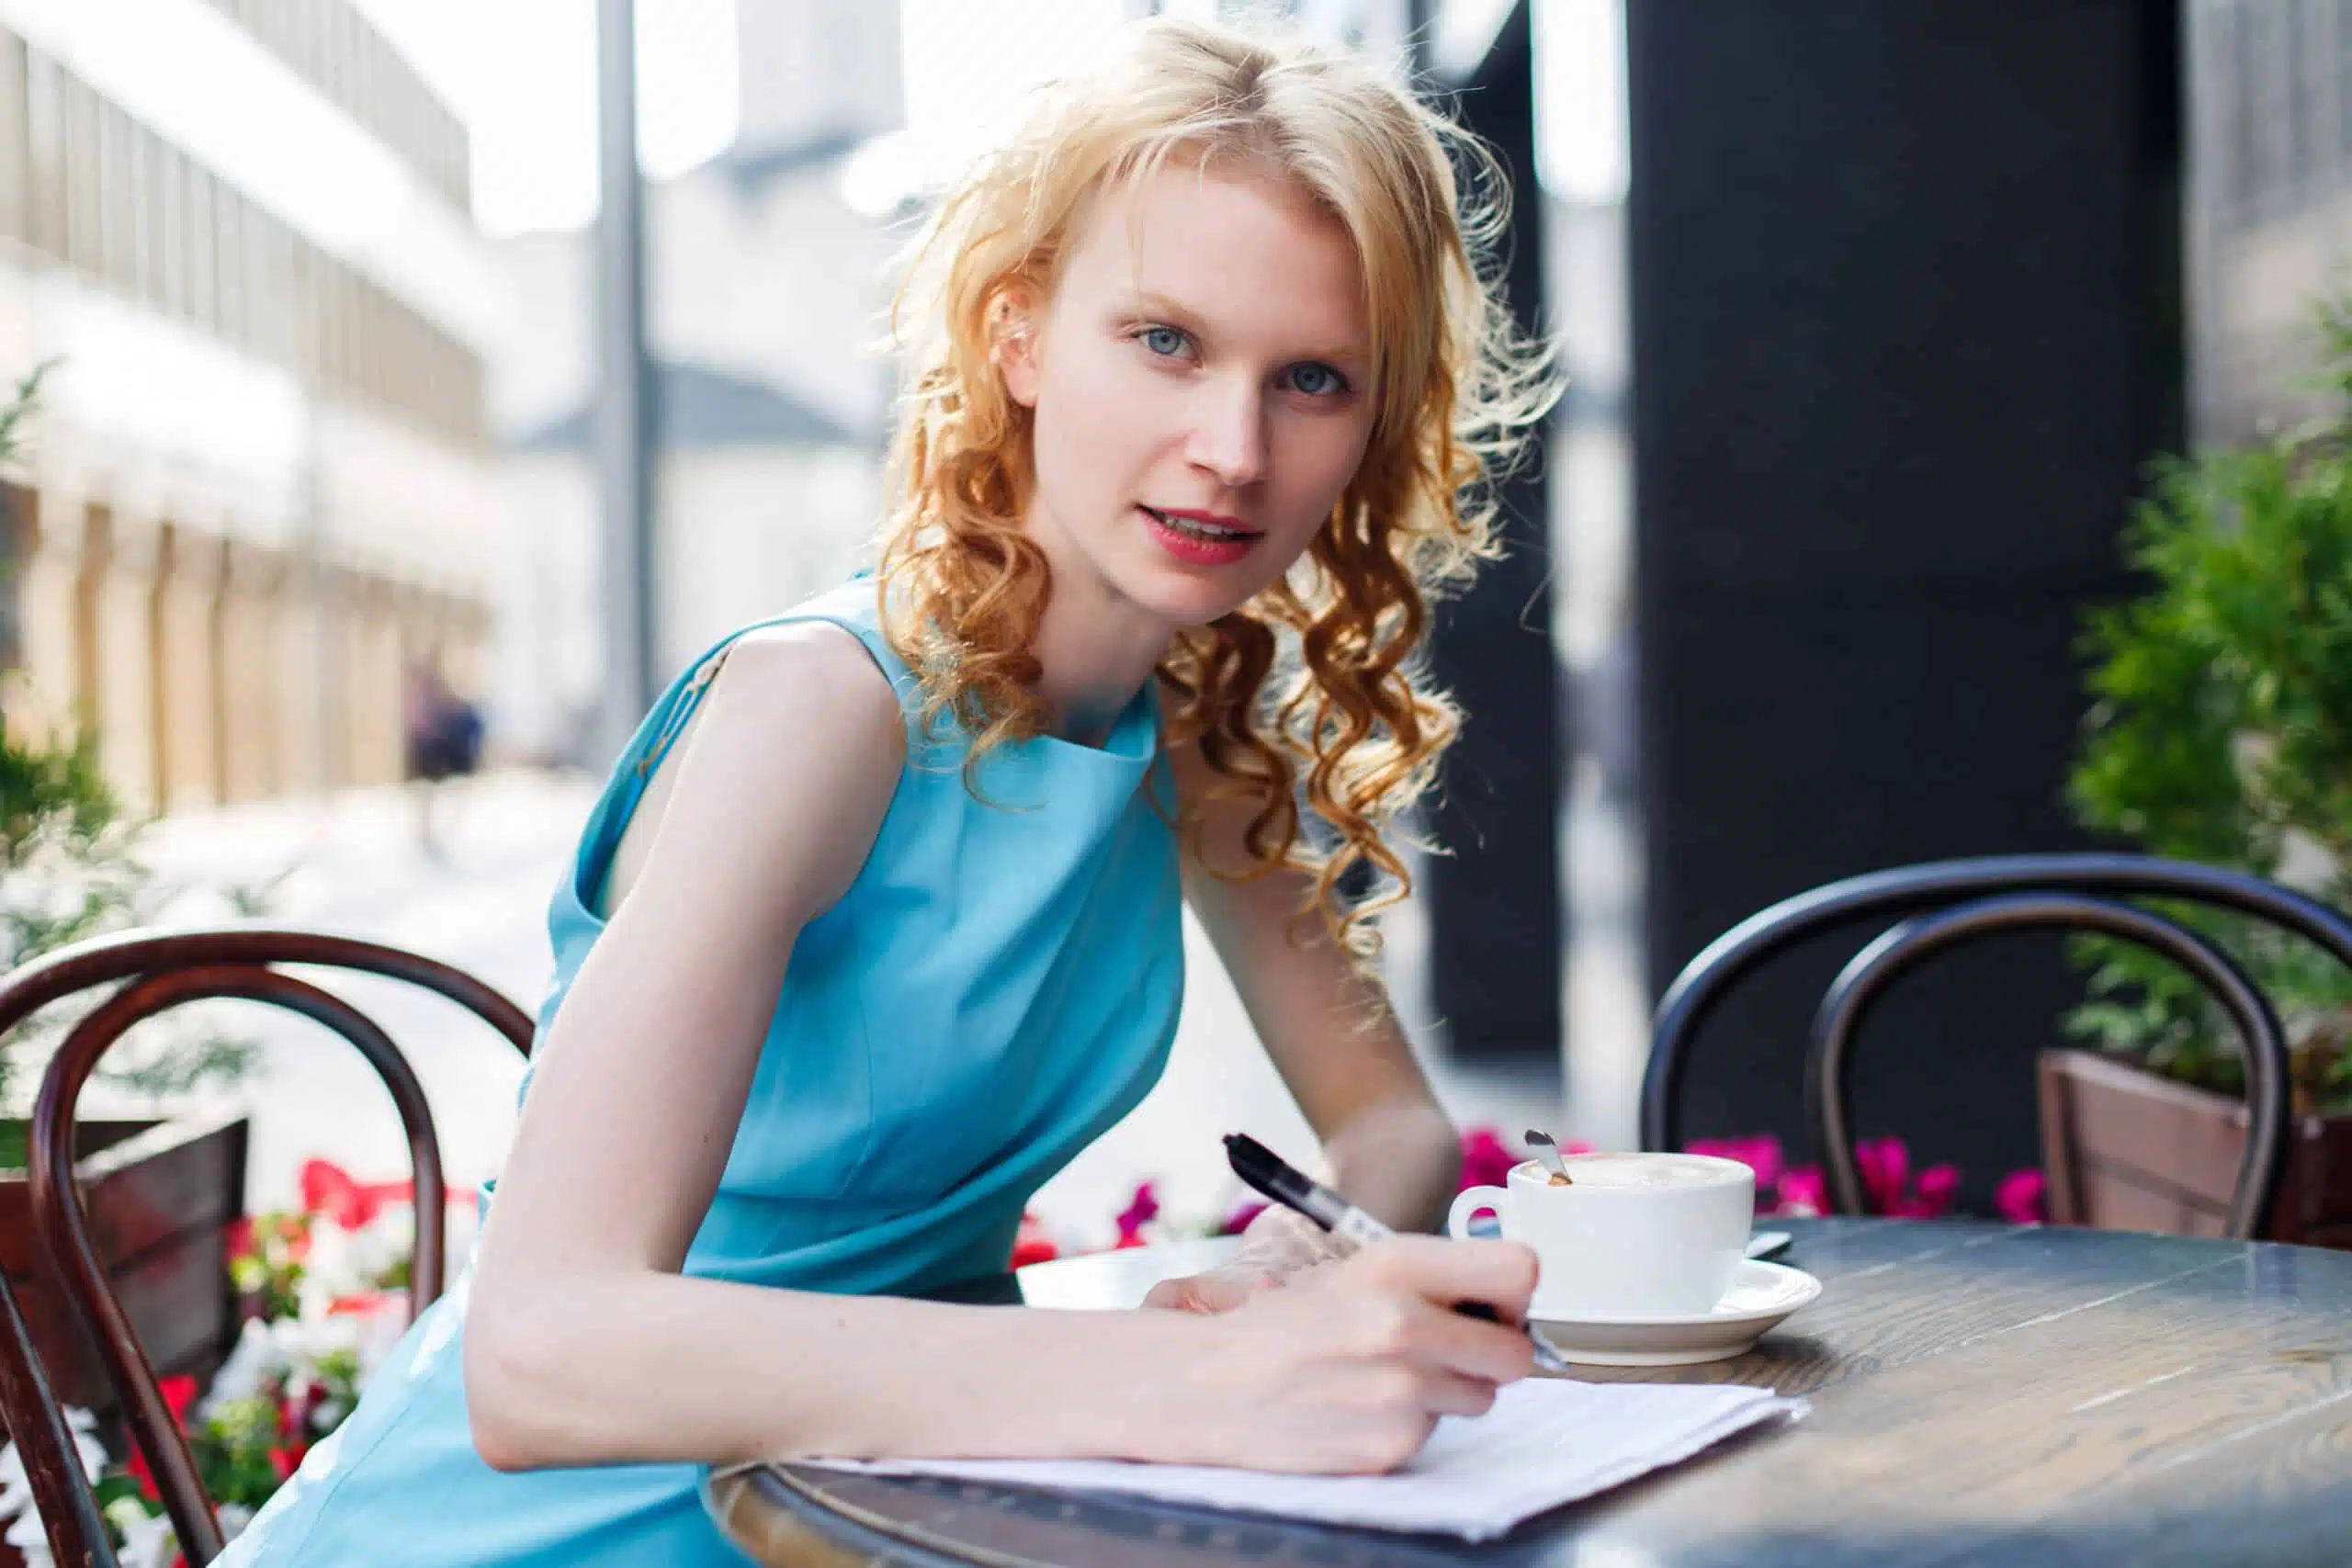 Young woman in elegant blue dress writing in cafe